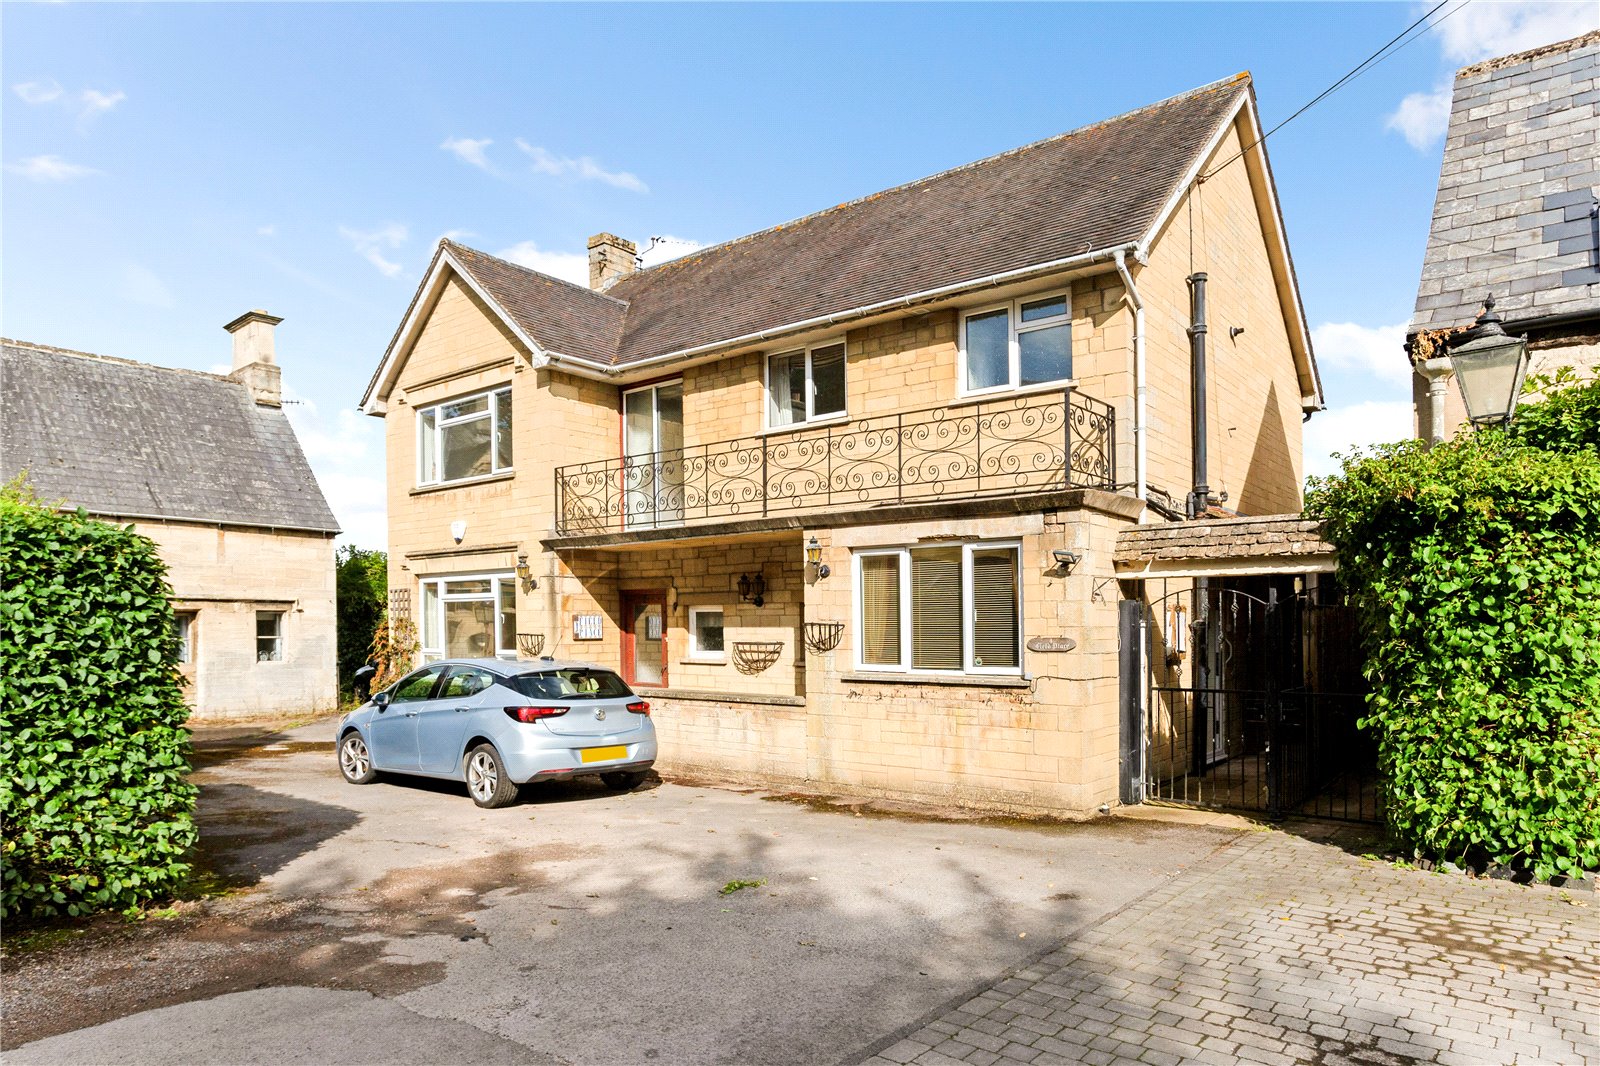 Paganhill, Stroud, Gloucestershire, GL5